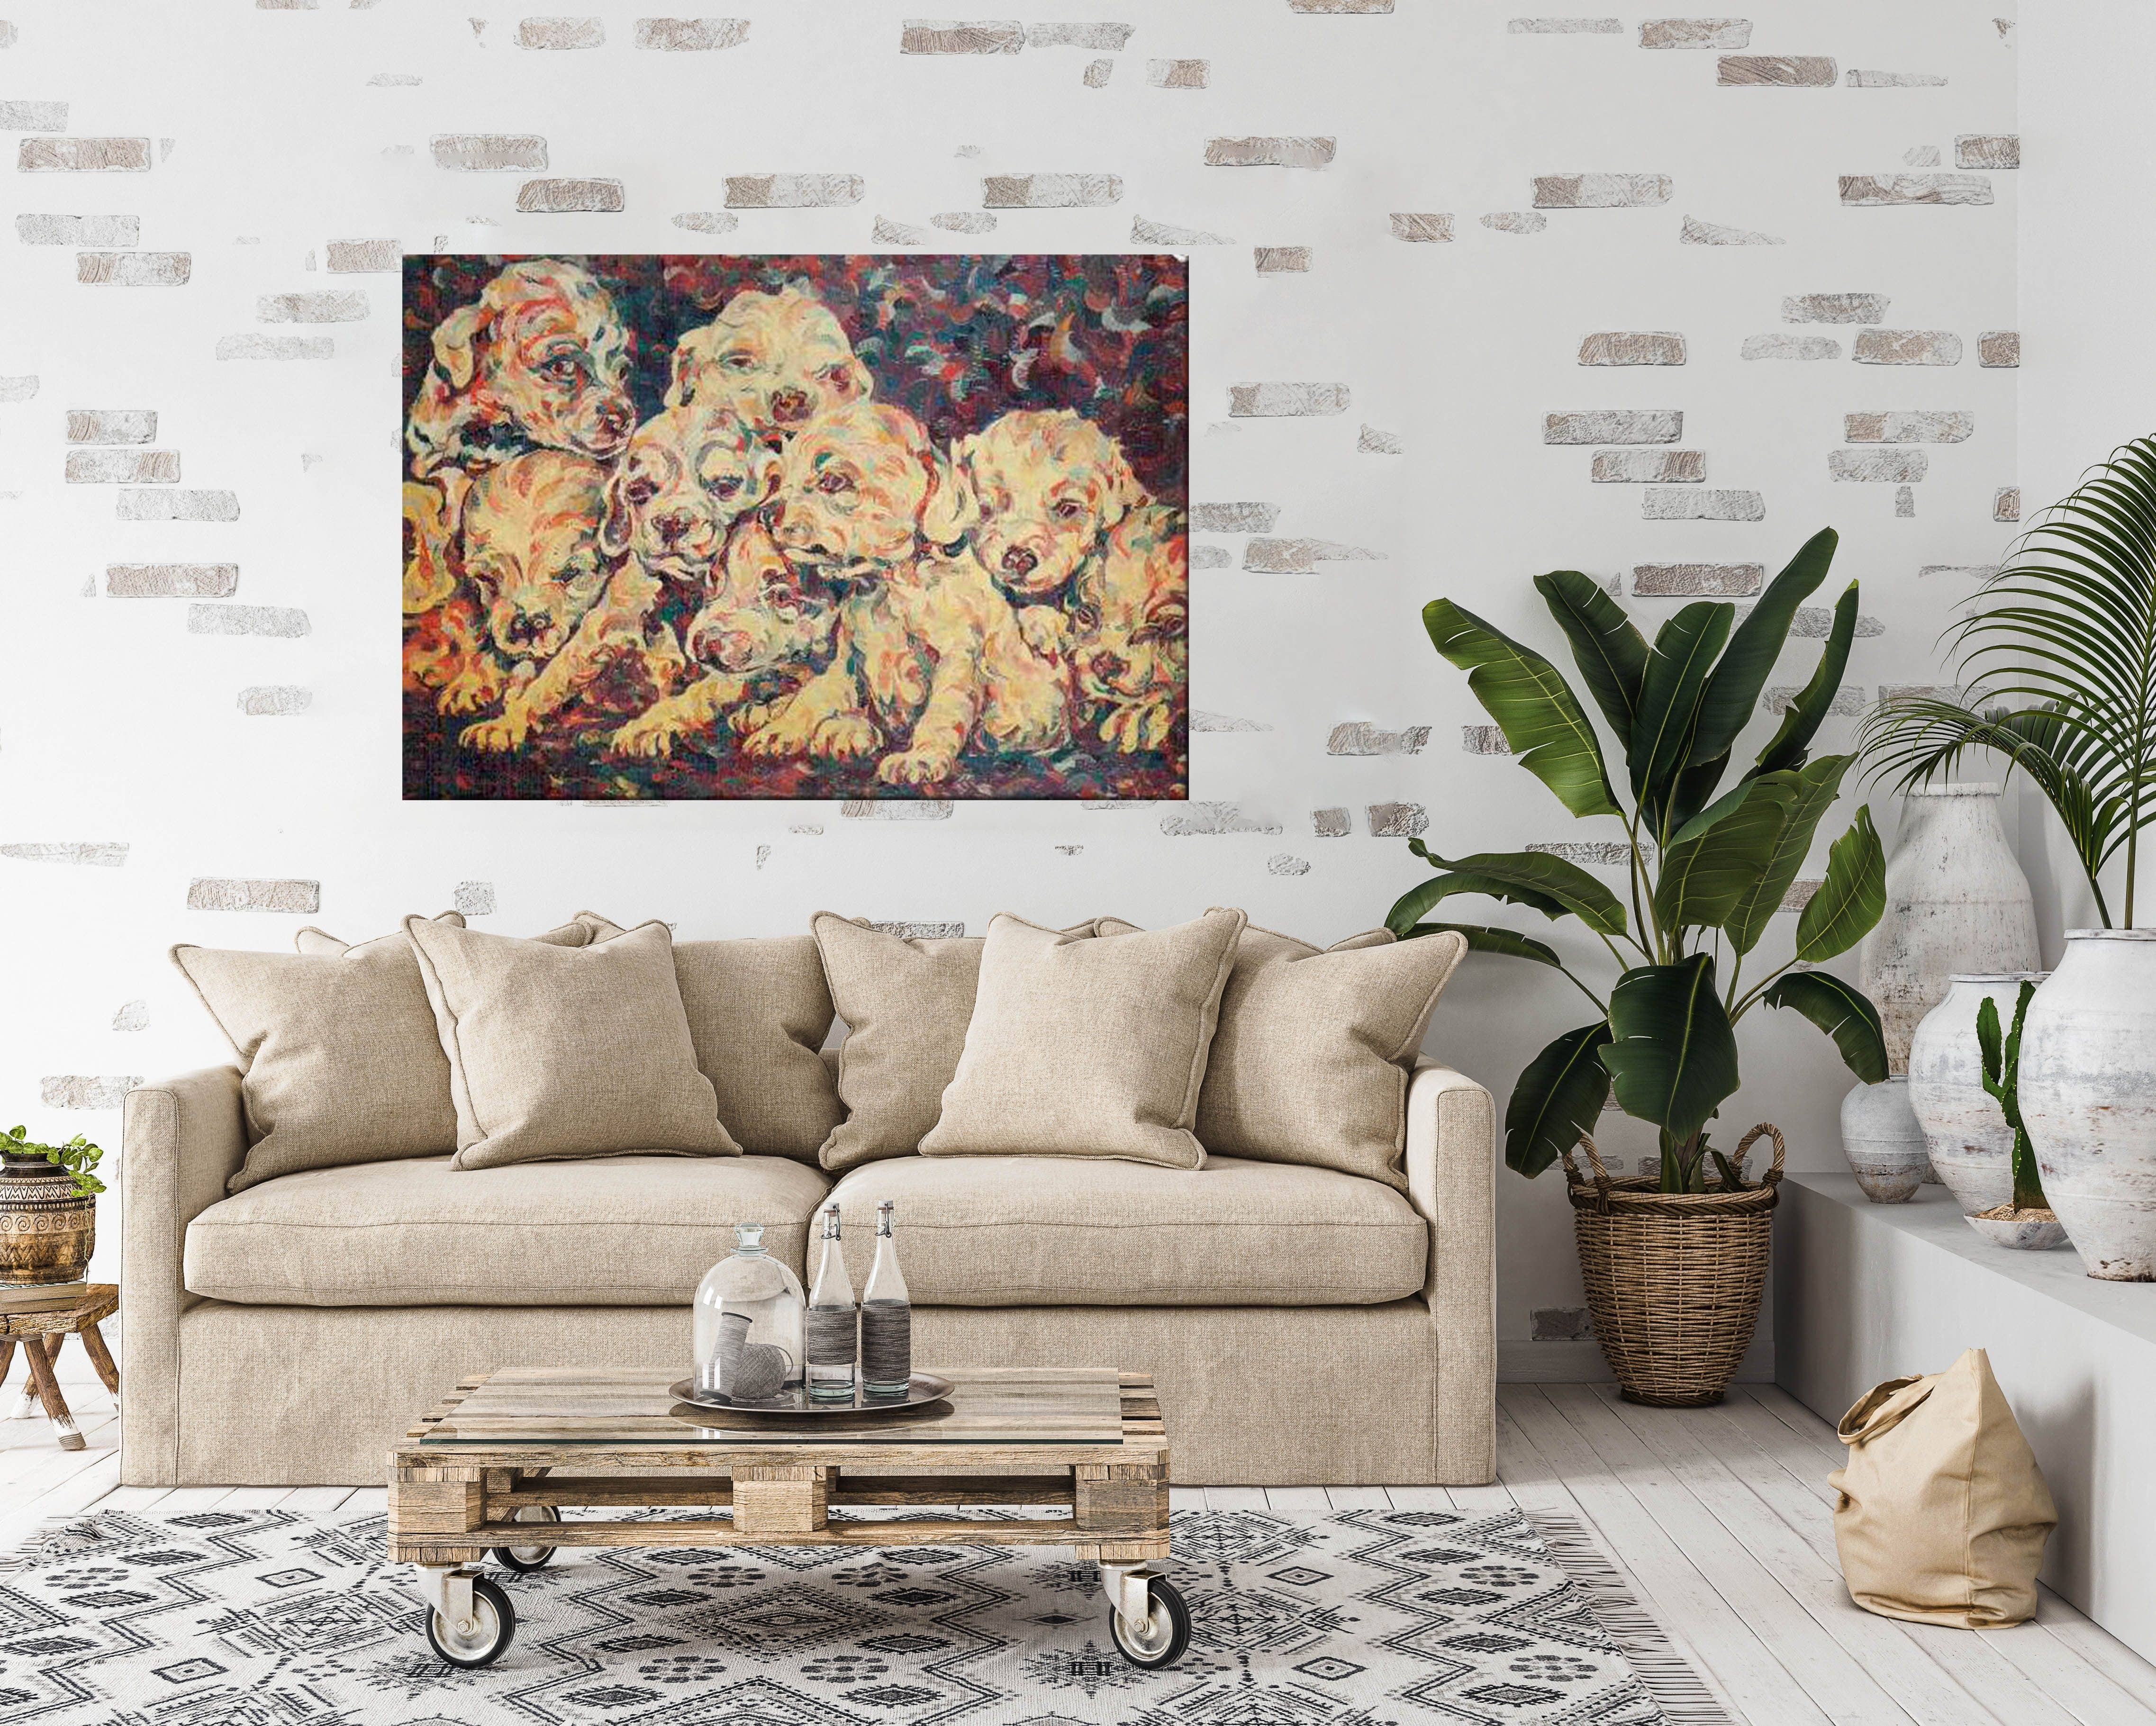 Painting of Nine displayed in a rustic living room on the wall